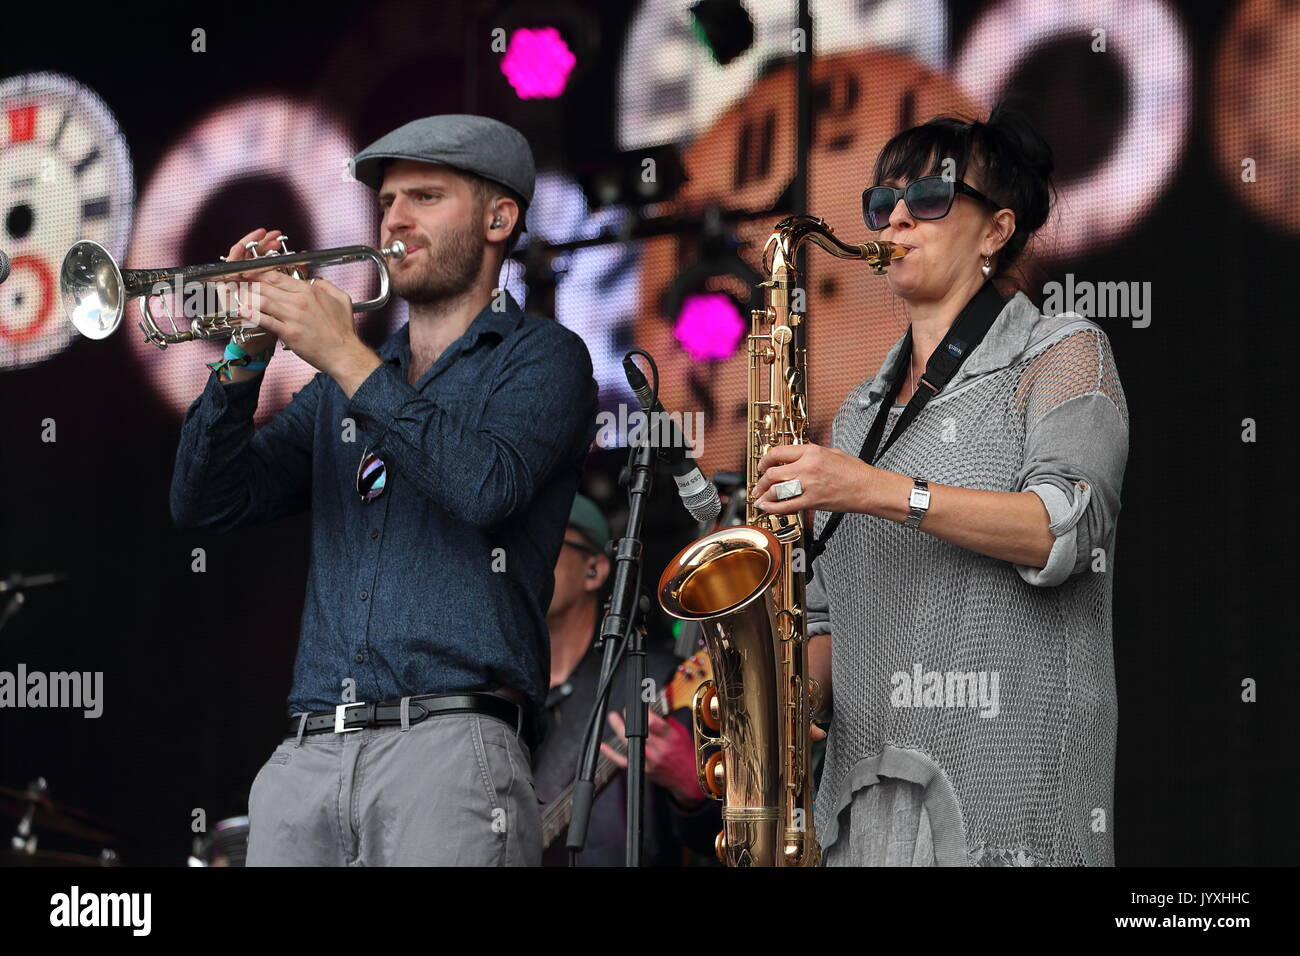 Henley-on-Thames, UK. 20th Aug, 2017. Thousands of revellers enjoy the music of The South at this year's Rewind Festival South 2017 of music of the 80's on its first day Credit: Uwe Deffner/Alamy Live News Stock Photo